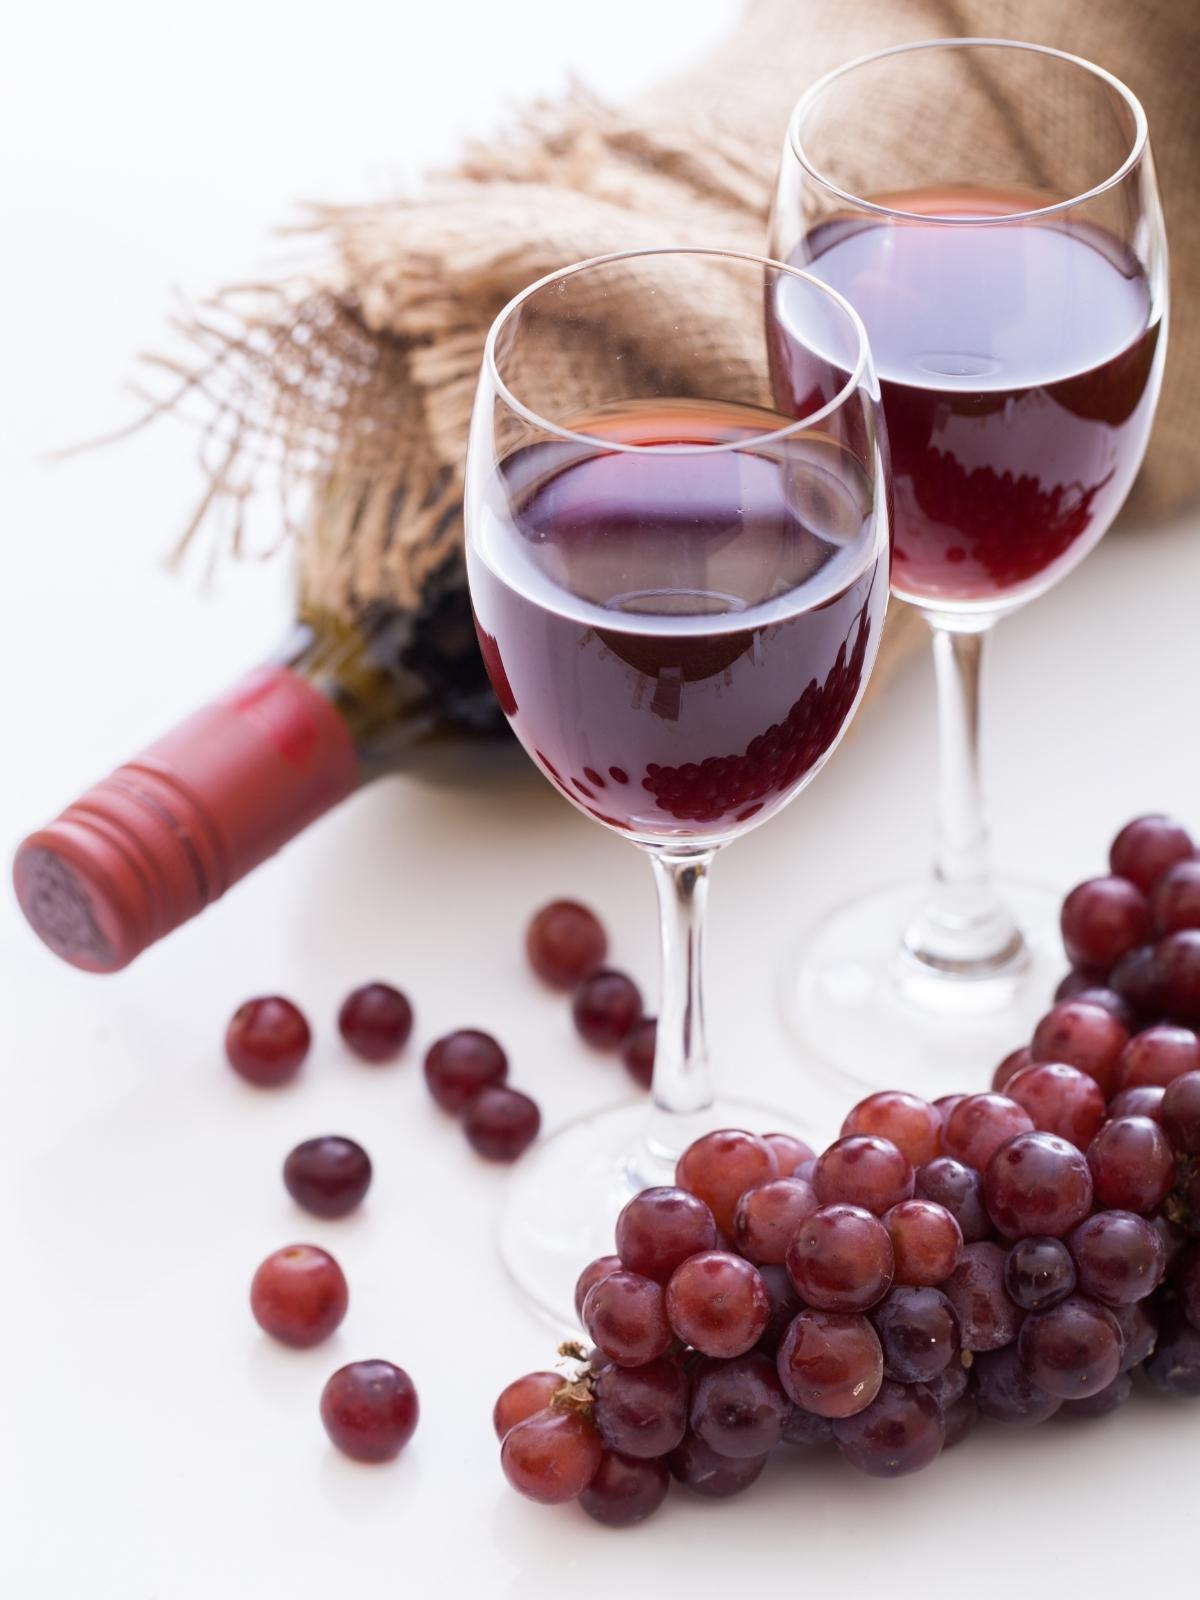 two glasses of red wine with red grapes nearby on a cream background.